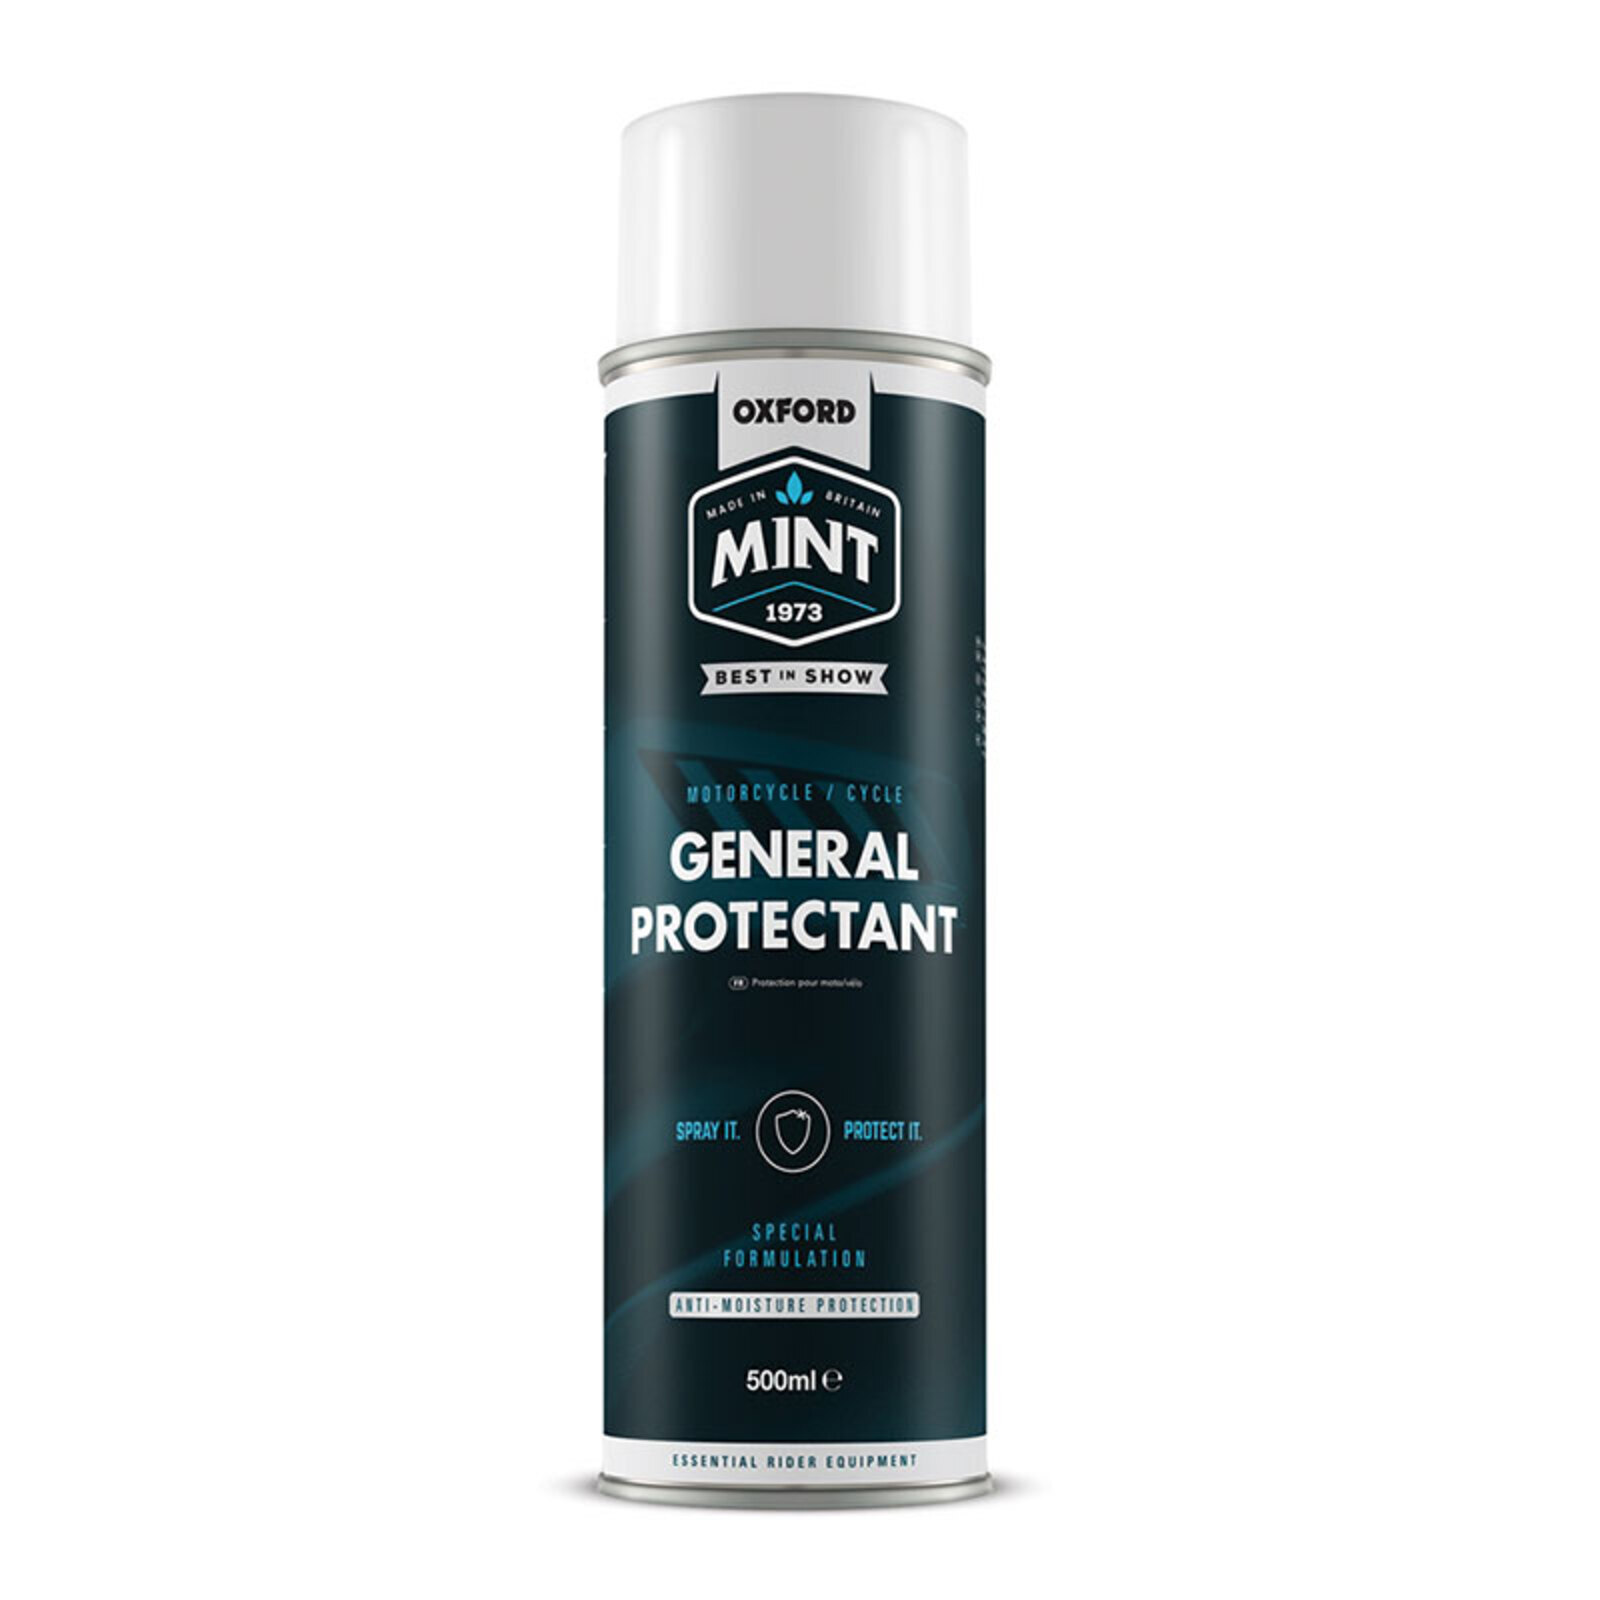 OXFORD MINT GENERAL PROTECTANT 500ML